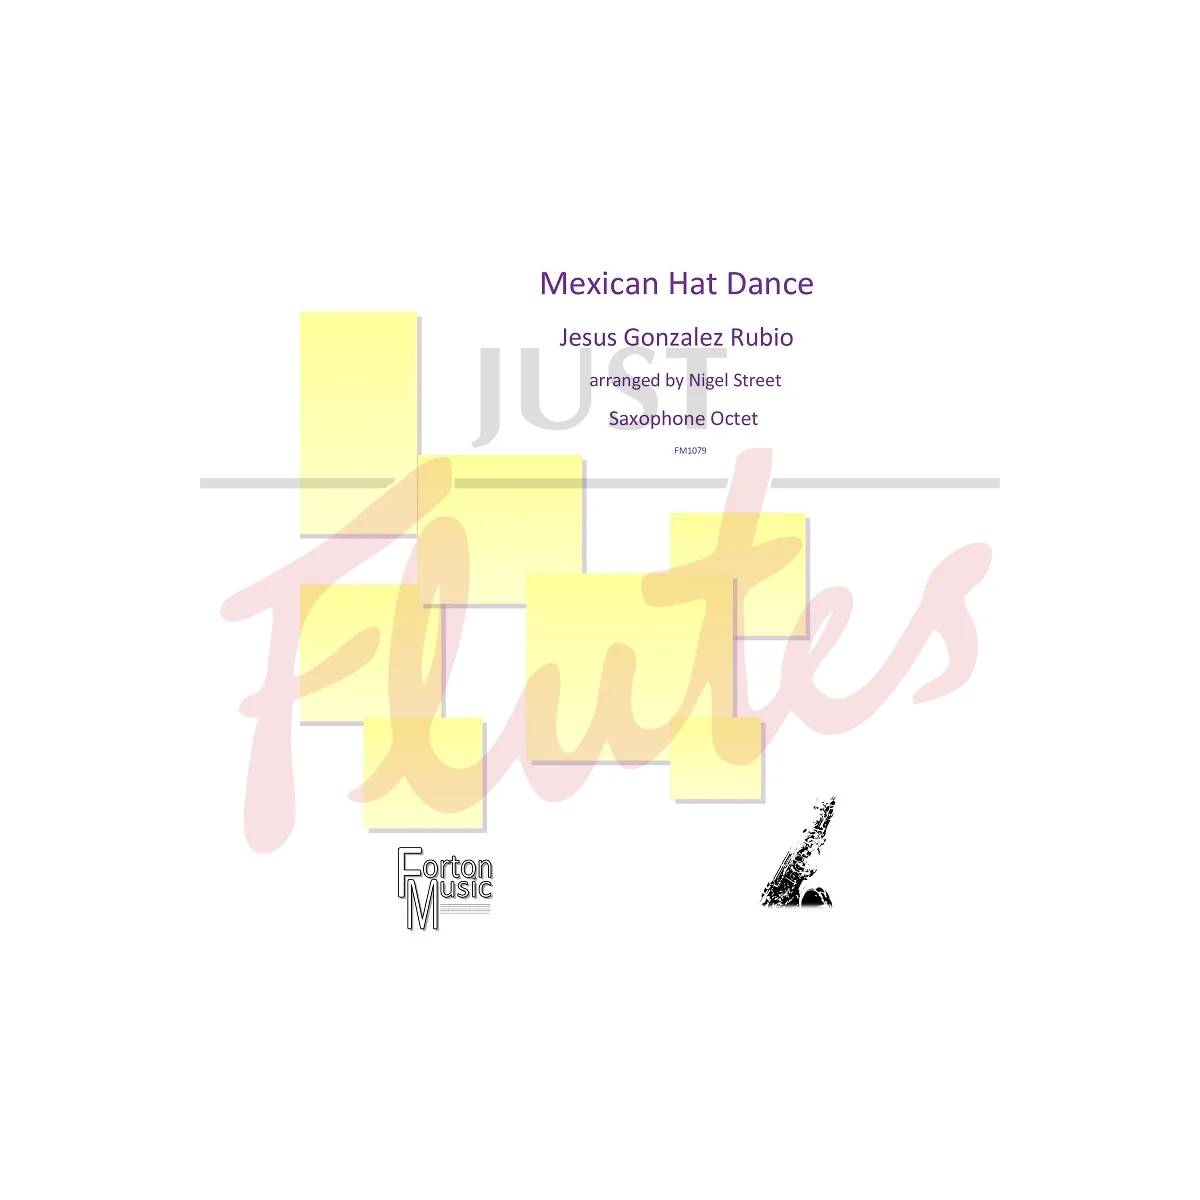 Mexican Hat Dance for Saxophone Octet